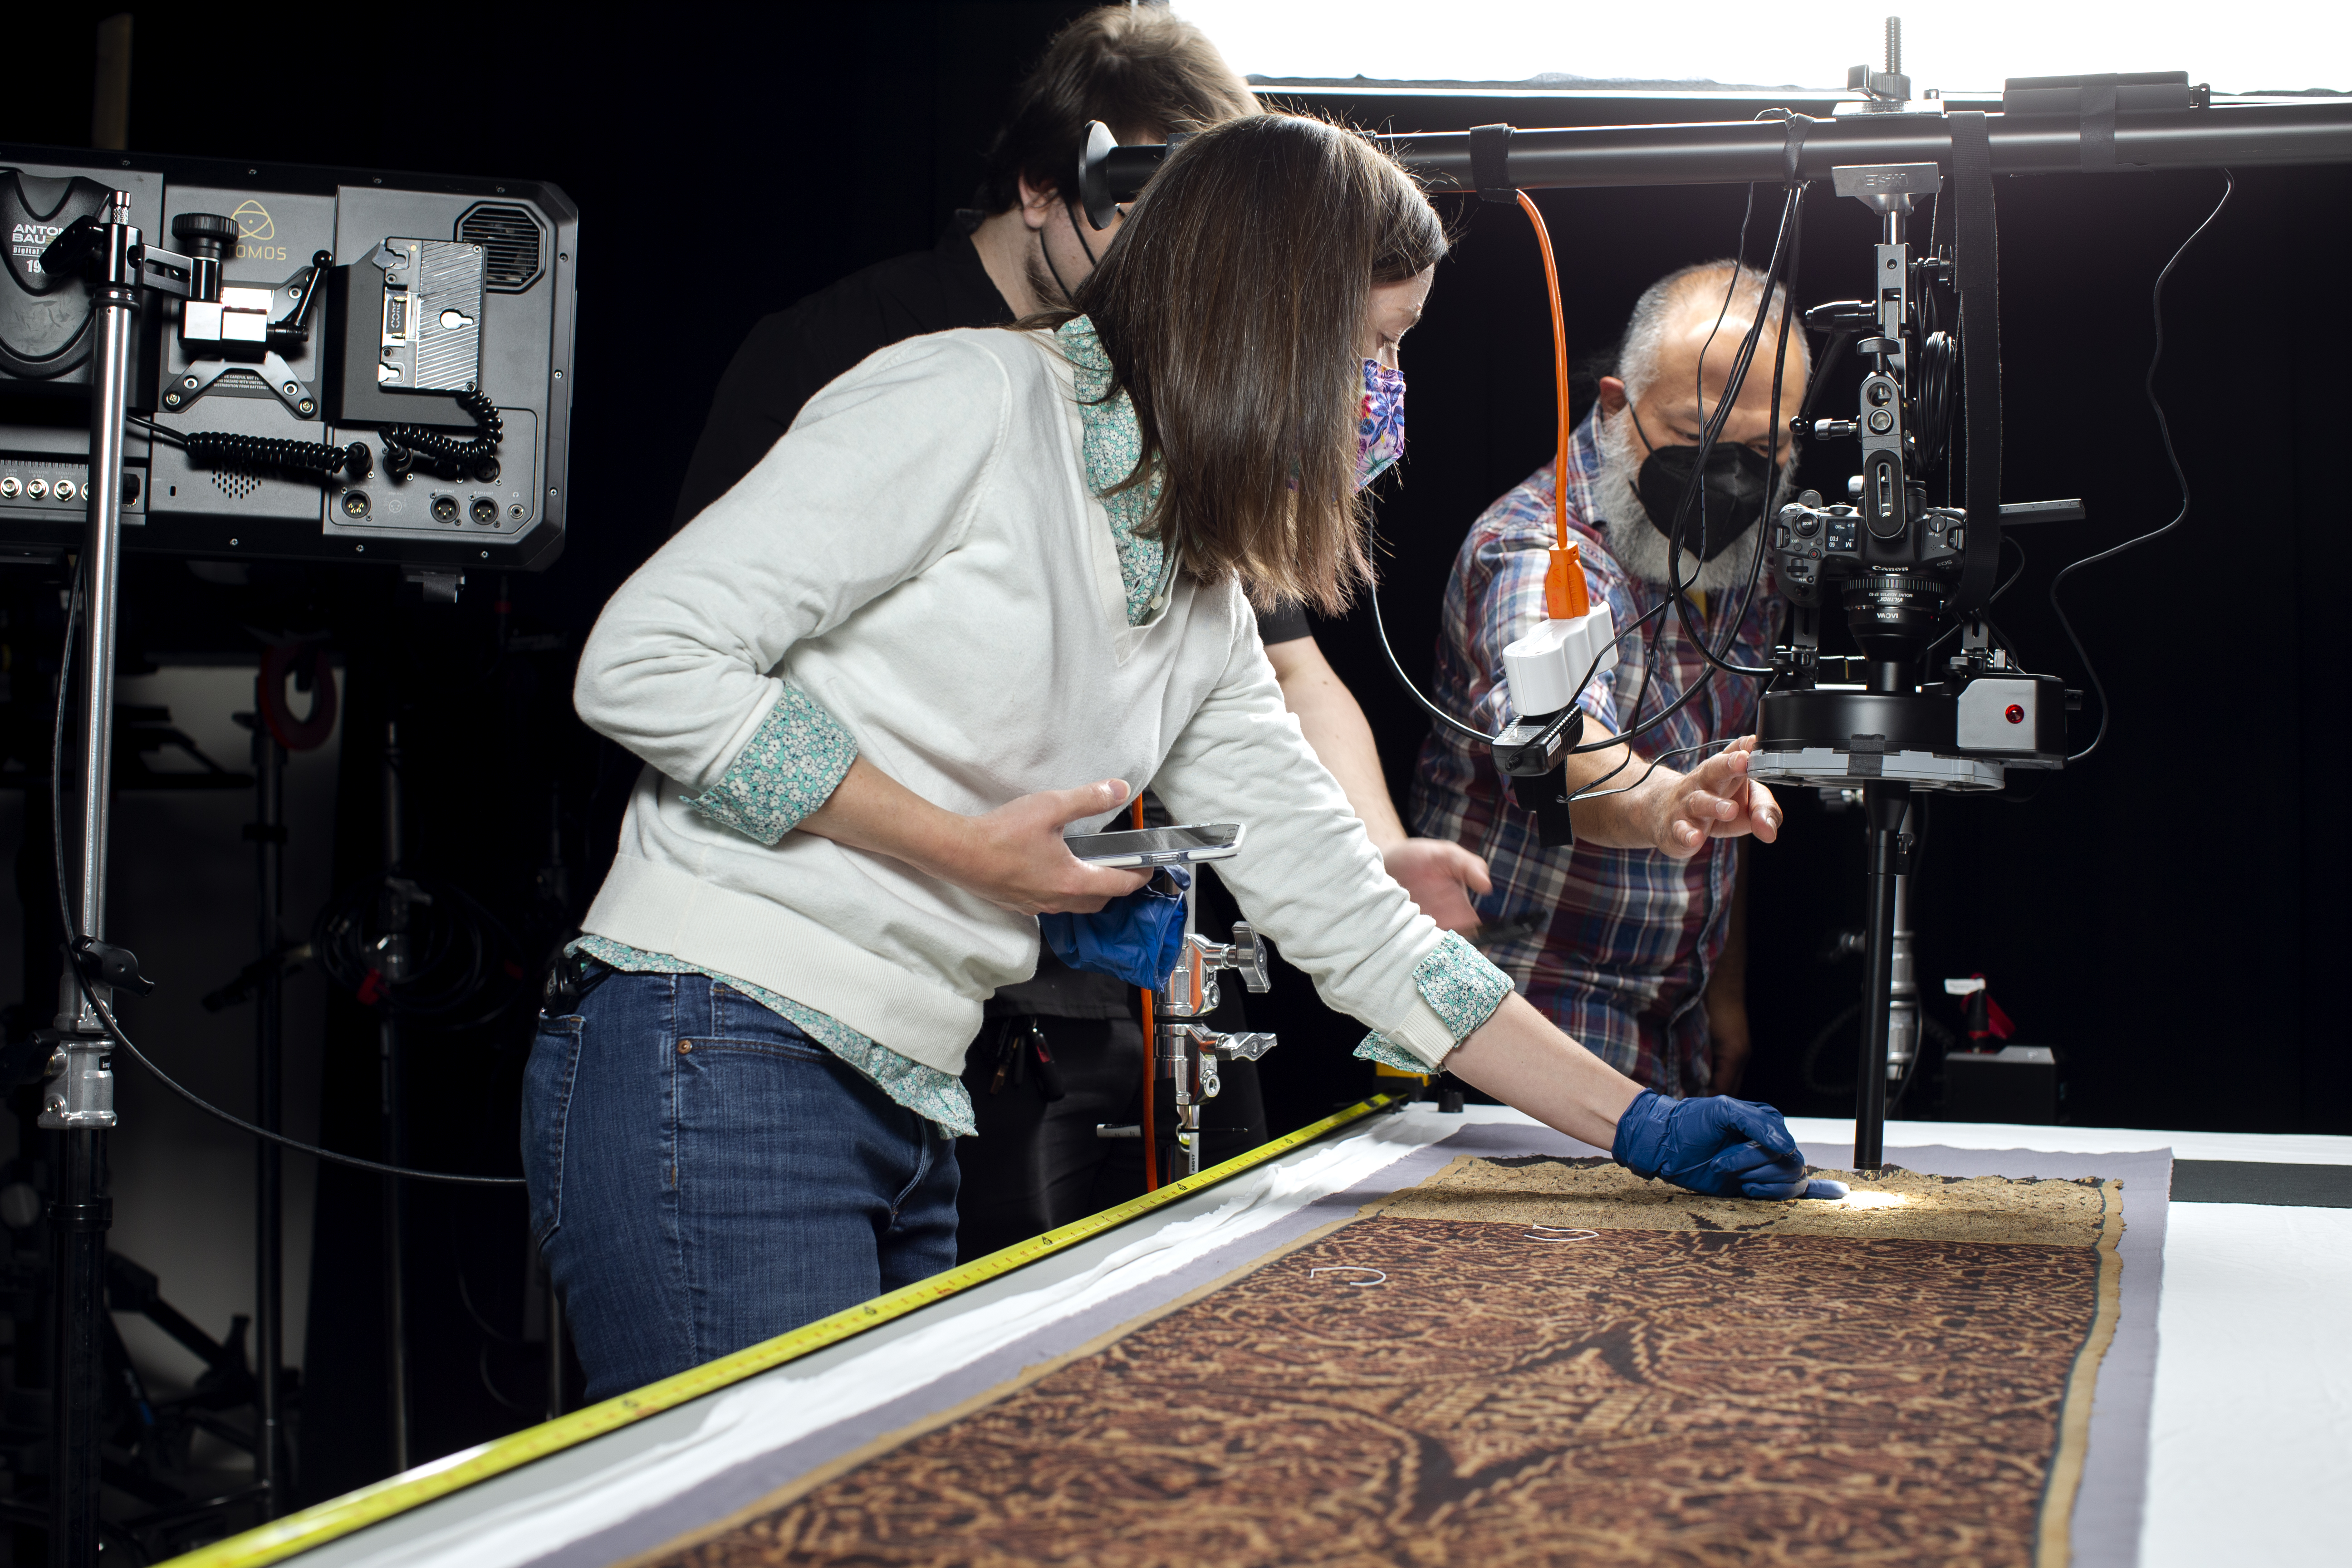 A photo of the team working together to capture an image of an object